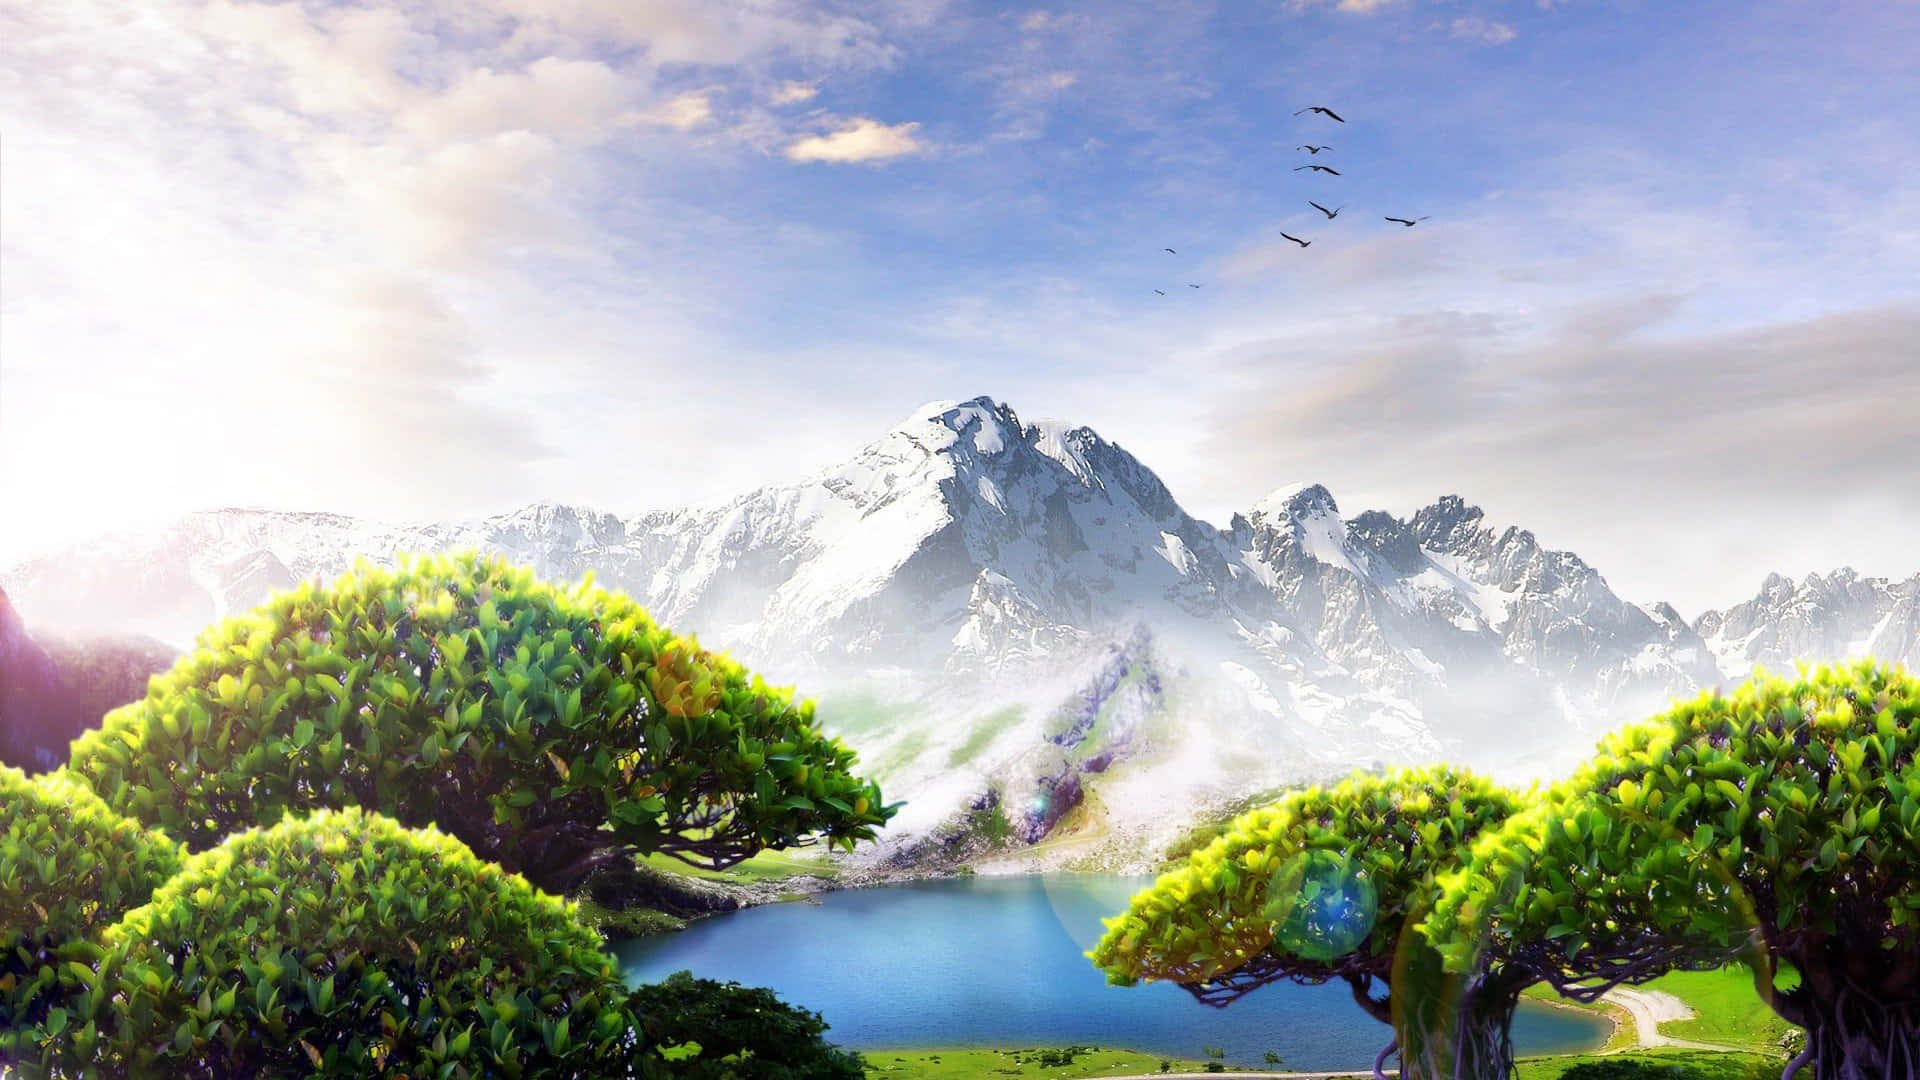 Trees And Mountain Landscape Art Picture